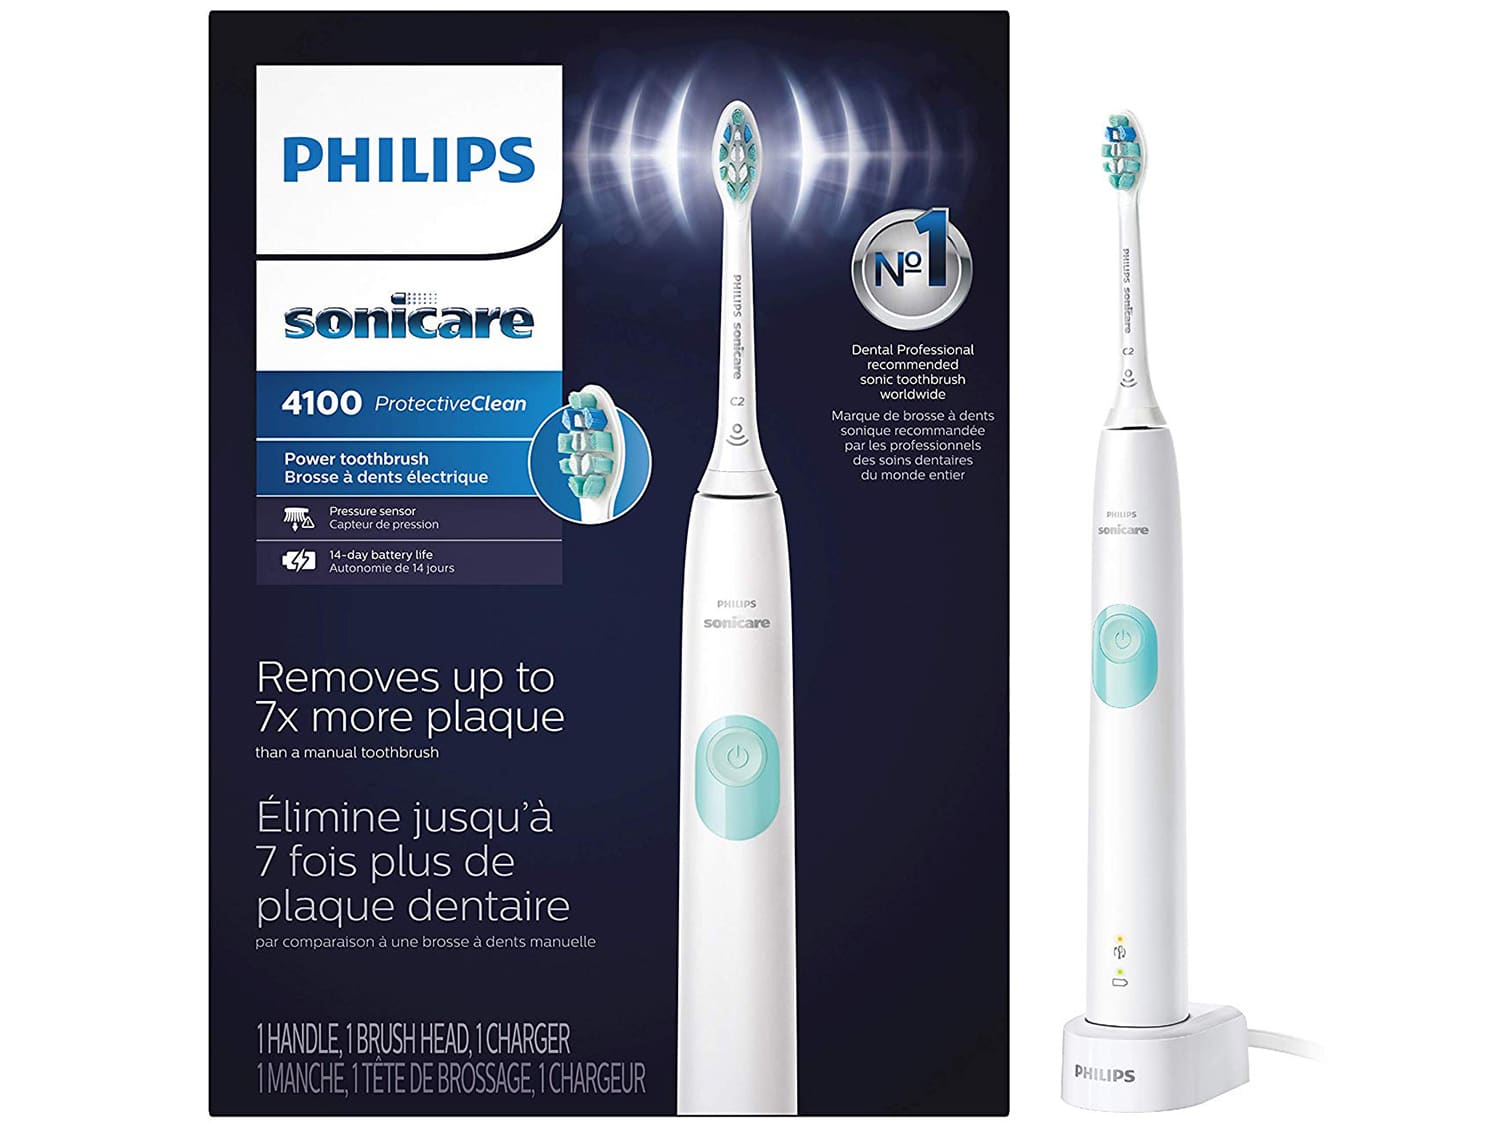 Philips Sonicare's ProtectiveClean 4100 Rechargeable Electric Toothbrush